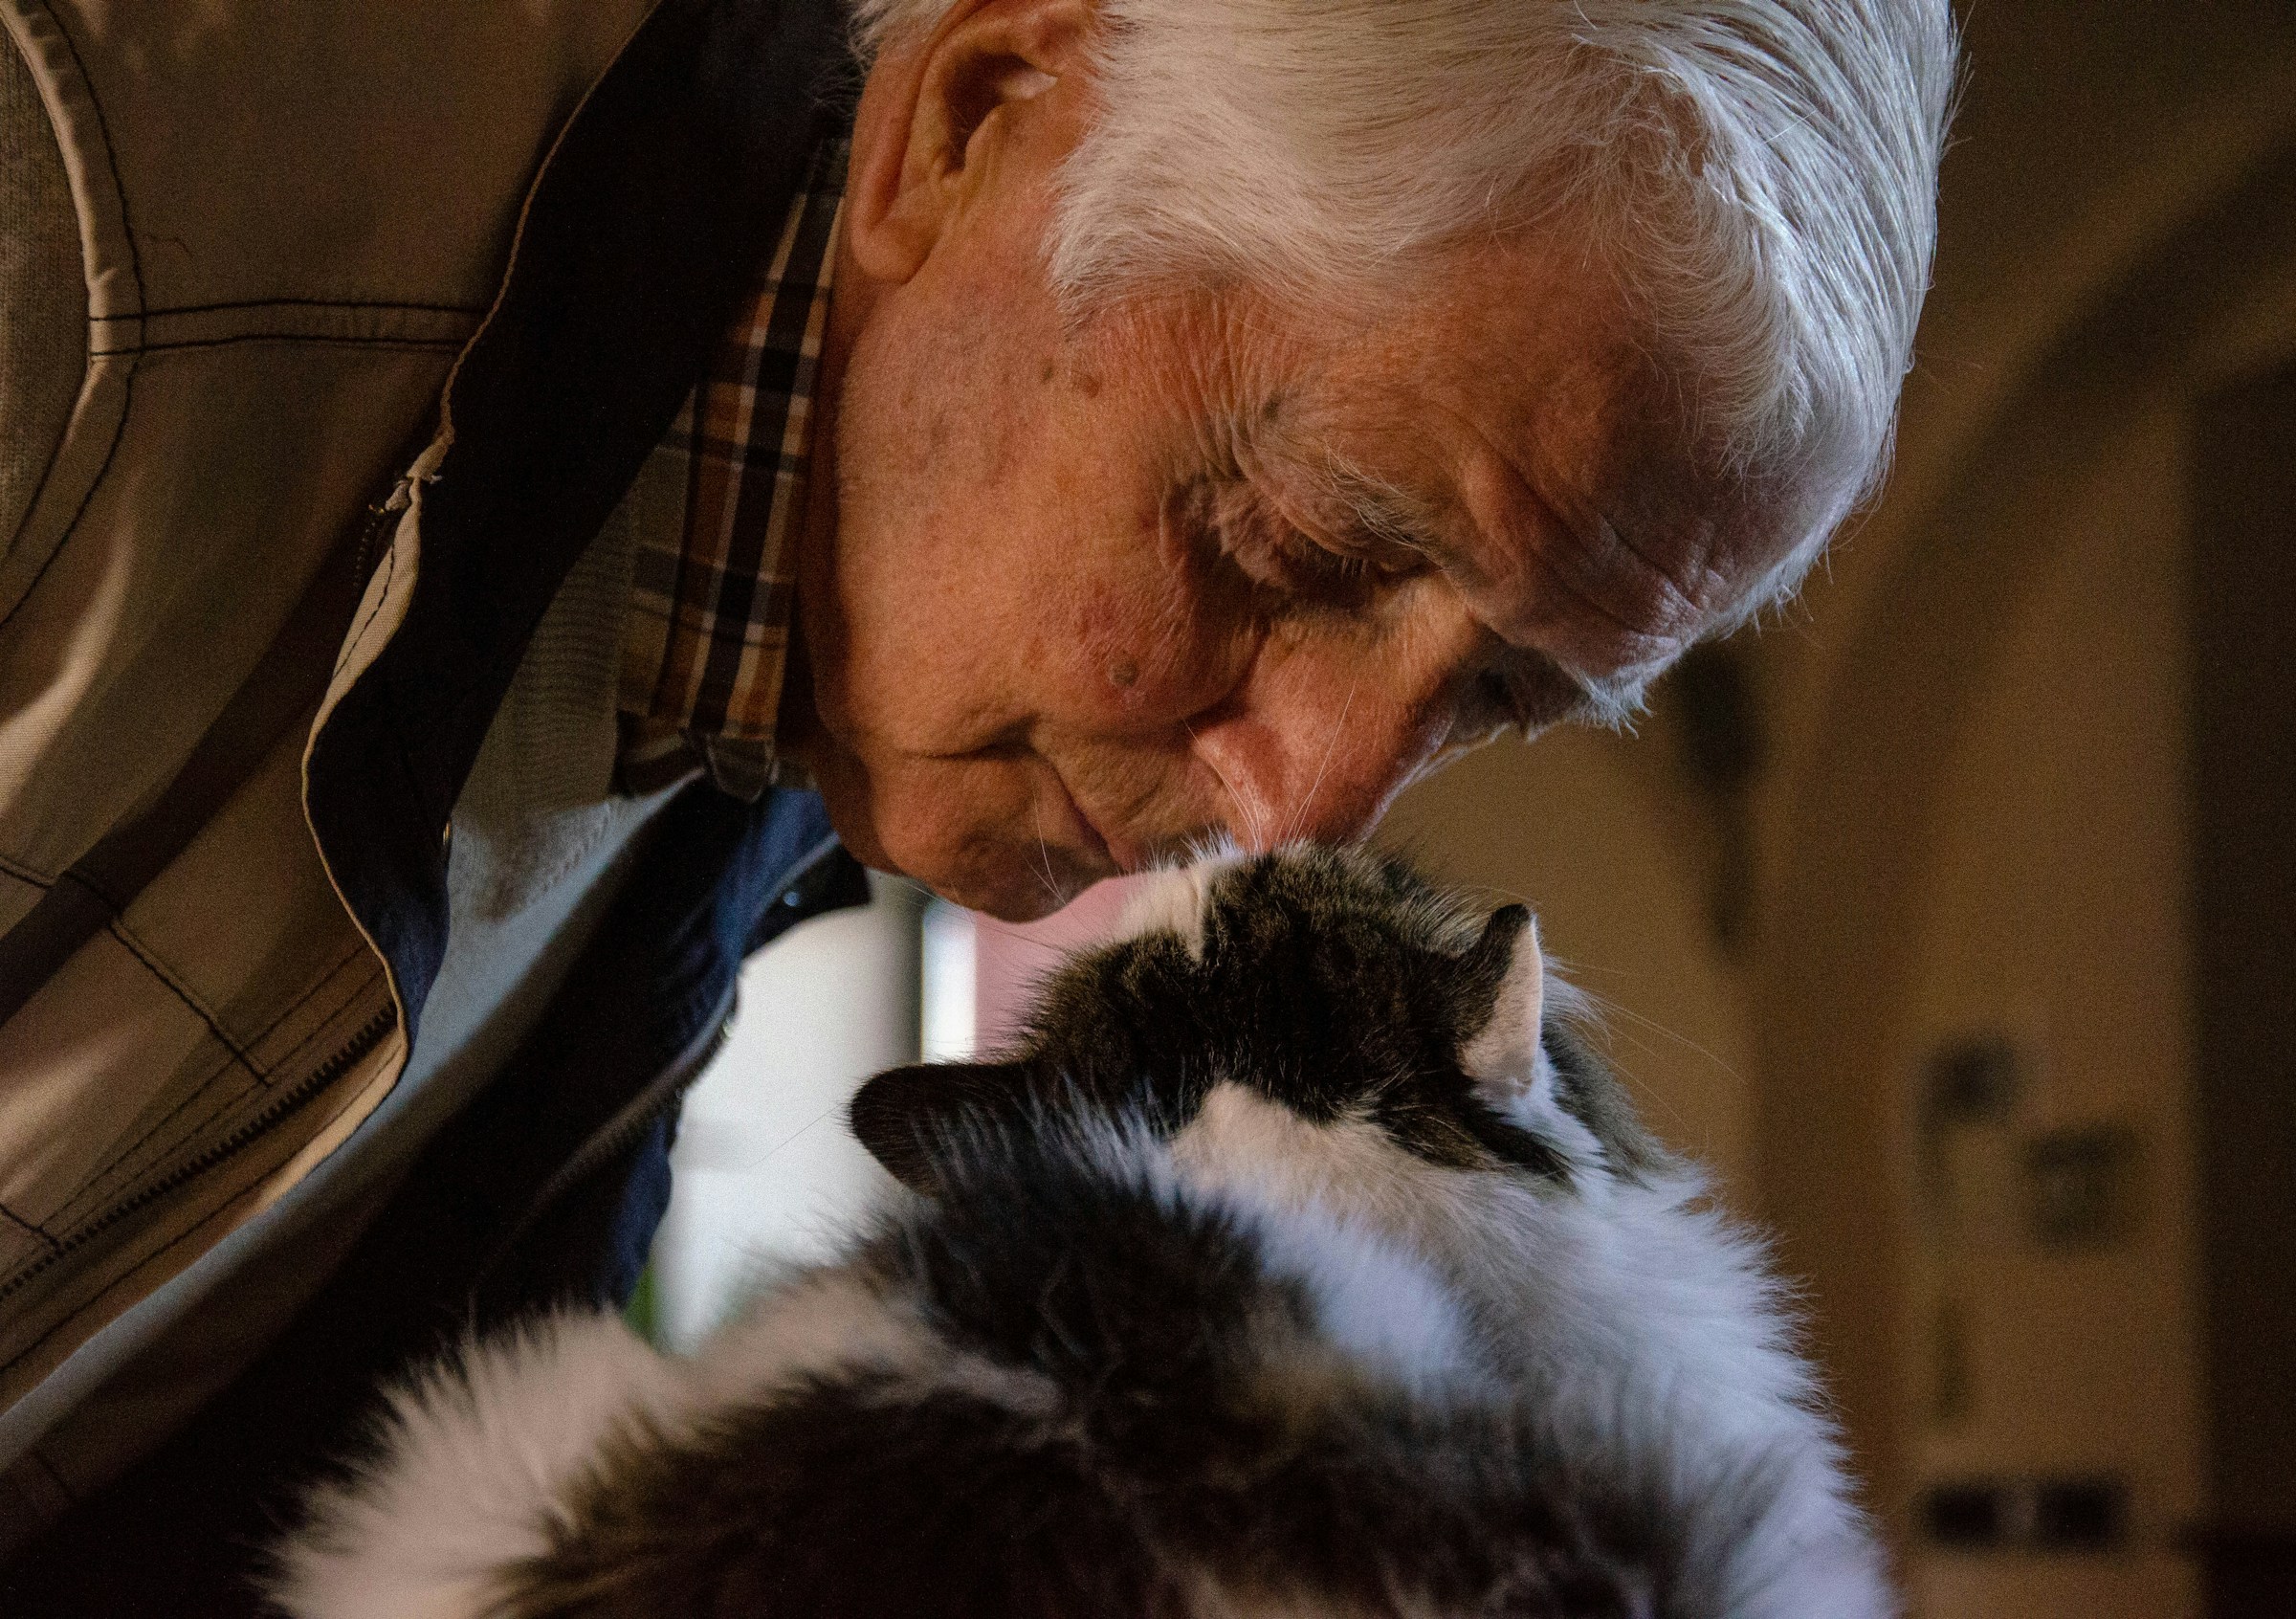 An old man with a cat | Source: Unsplash